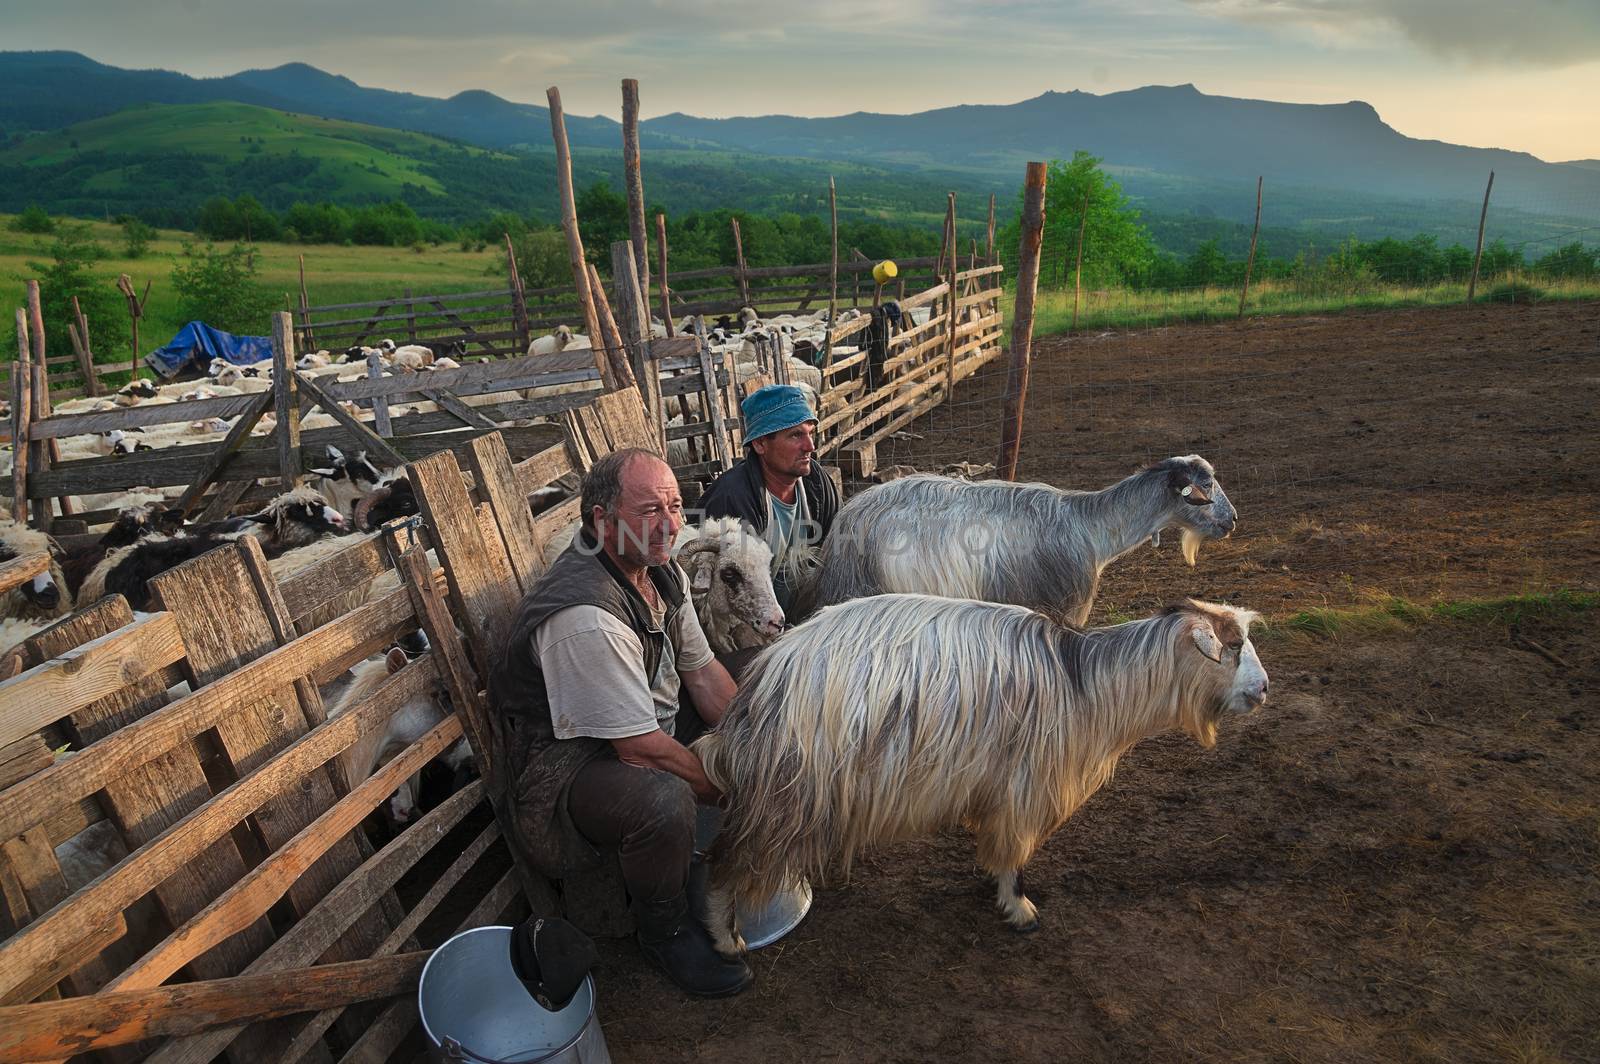 Maramures, Romania - June 22, 2016: Visitors pet a horse in the Carpathian Mountains during Sunset. Shepherds often allow visits to their camp with  small tourist fee. by adonis_abril